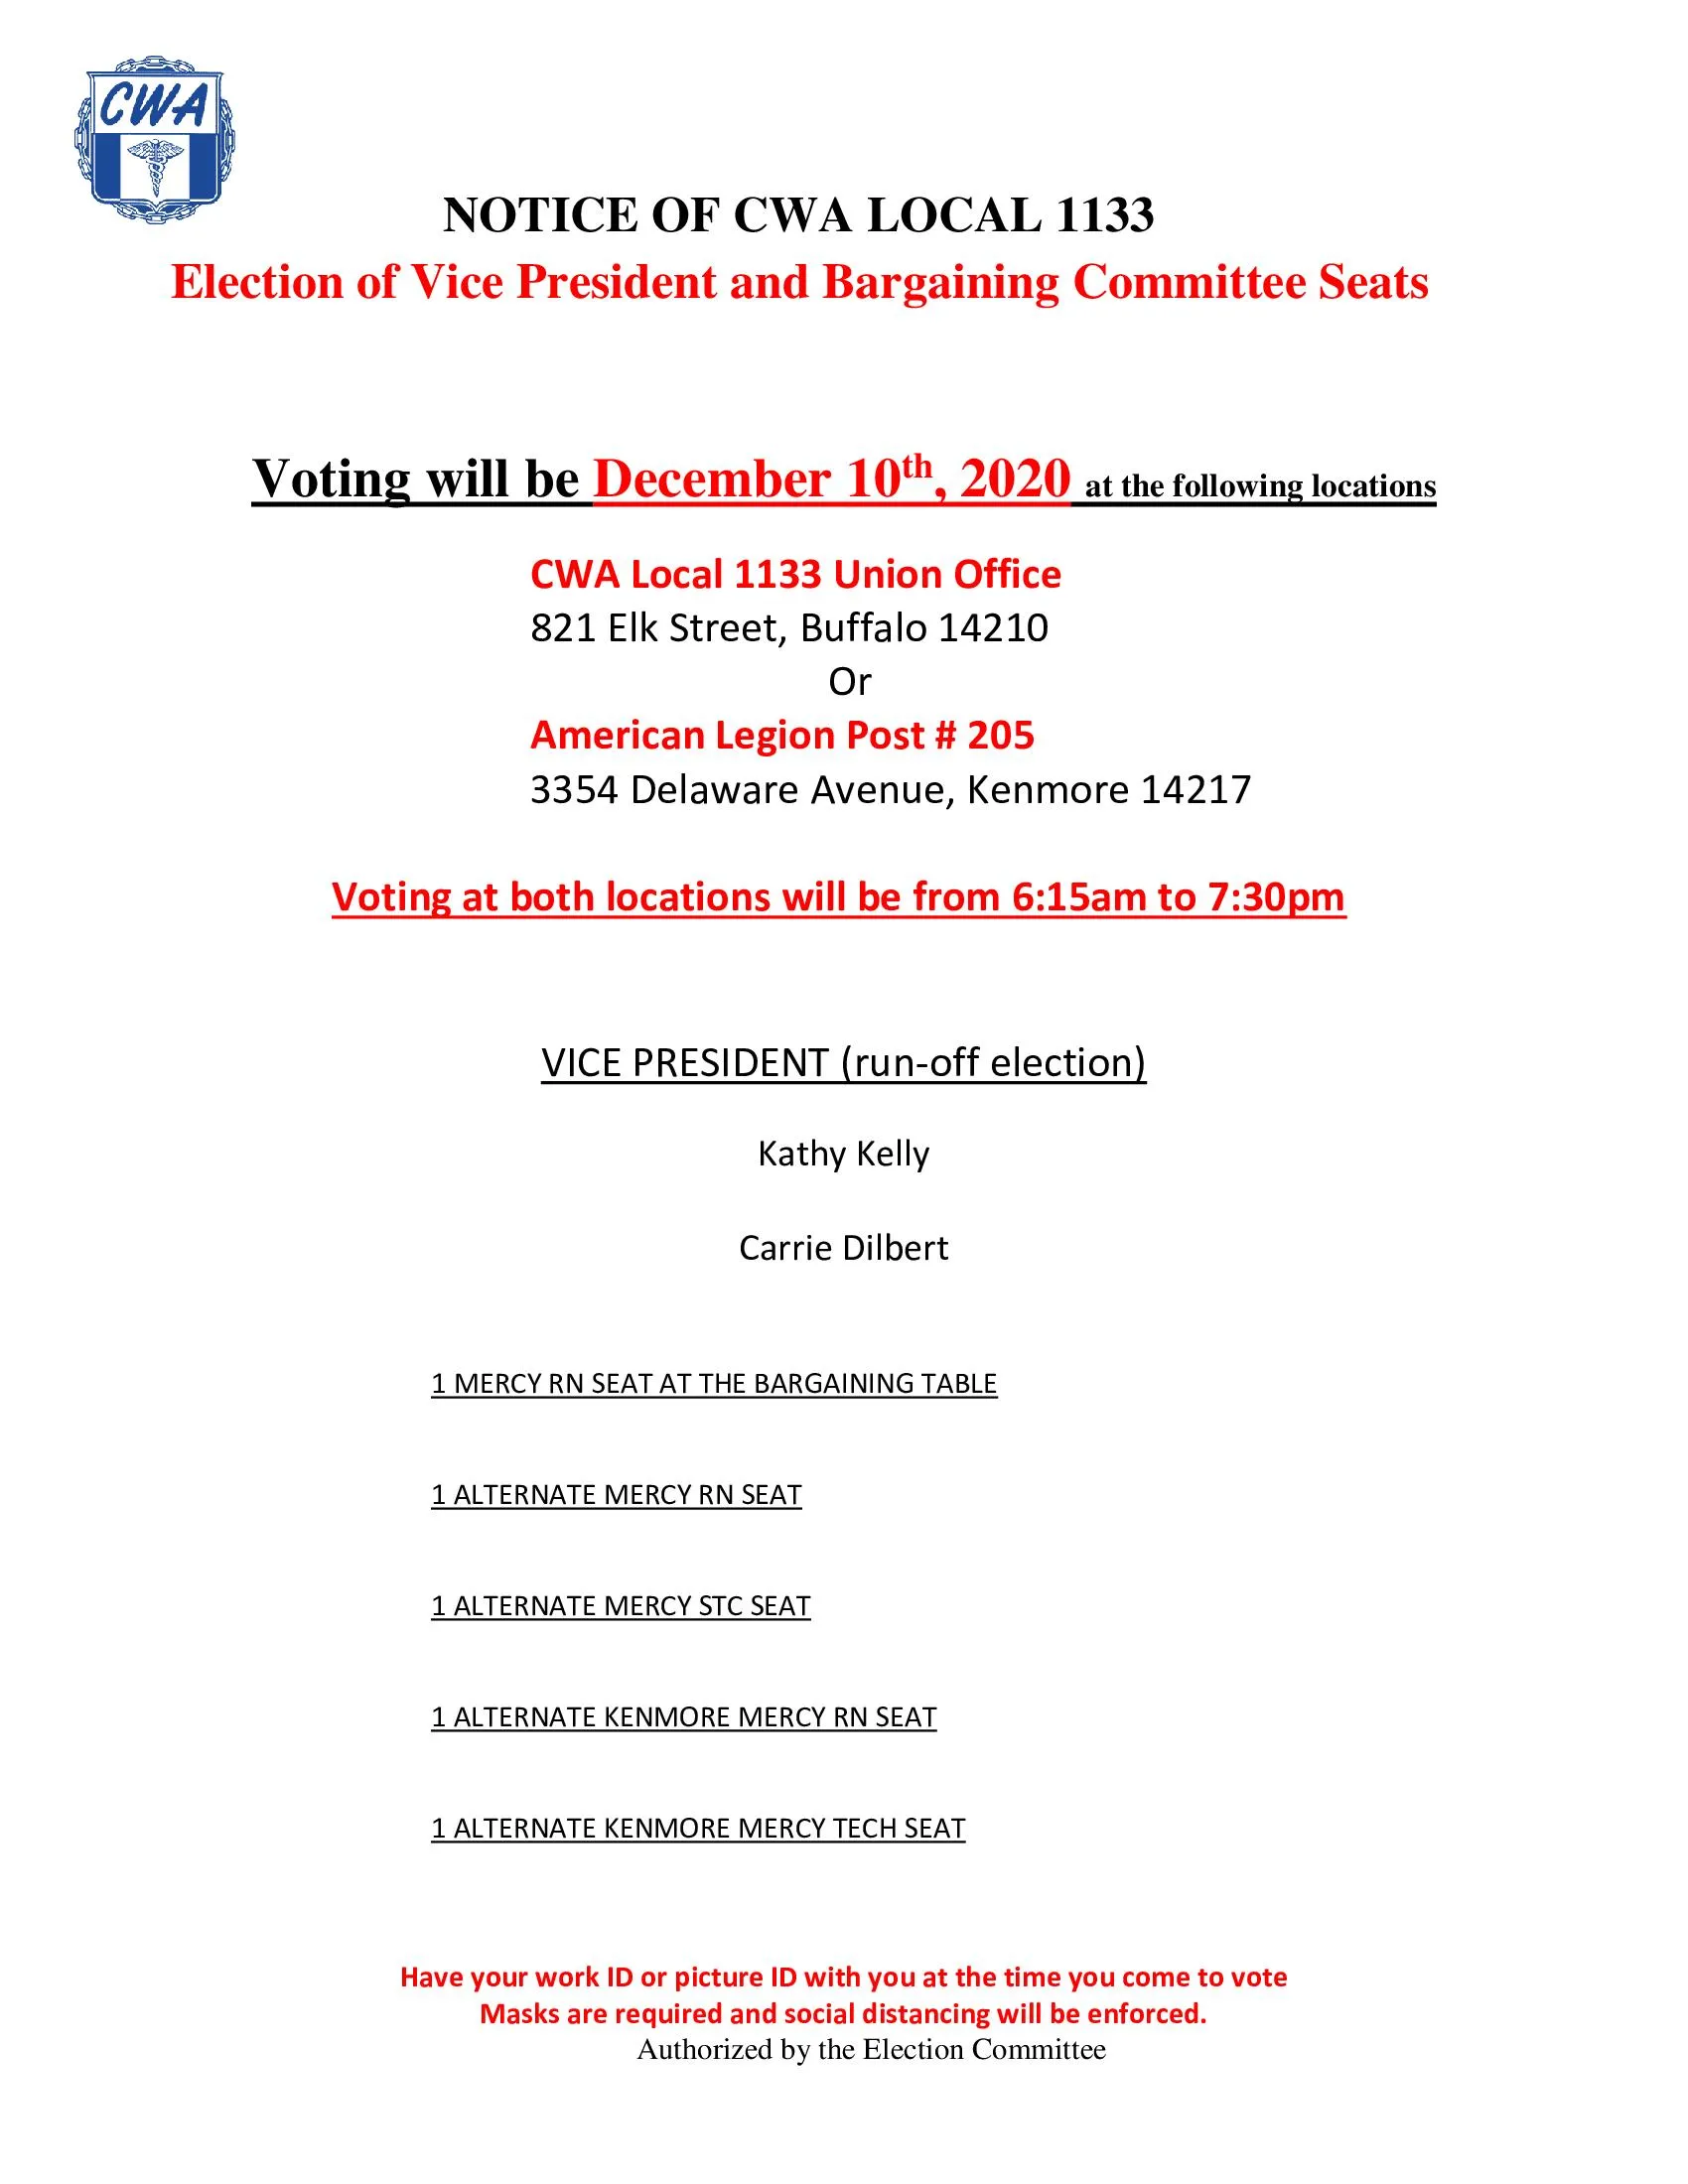 notice-of-cwa-election-for-vp-and-bargaini</body></html>